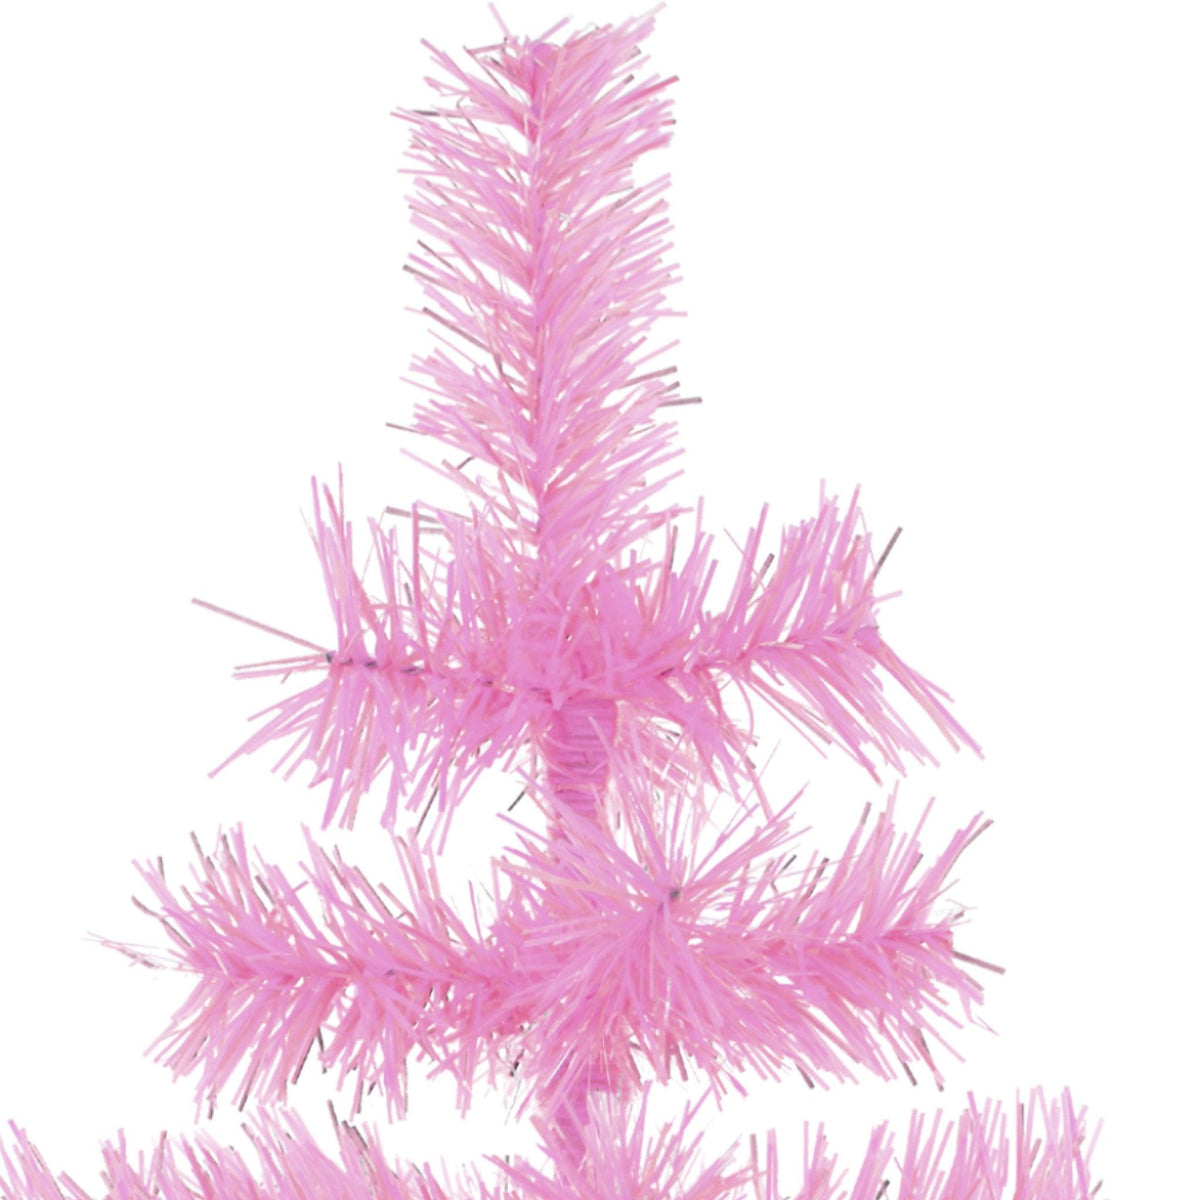 Lee Display's Original Pink Tinsel Christmas Trees! Decorate for the holidays with retro-style Barbie Pink Christmas Trees. Incorporate a little pink into your holiday decorations this year